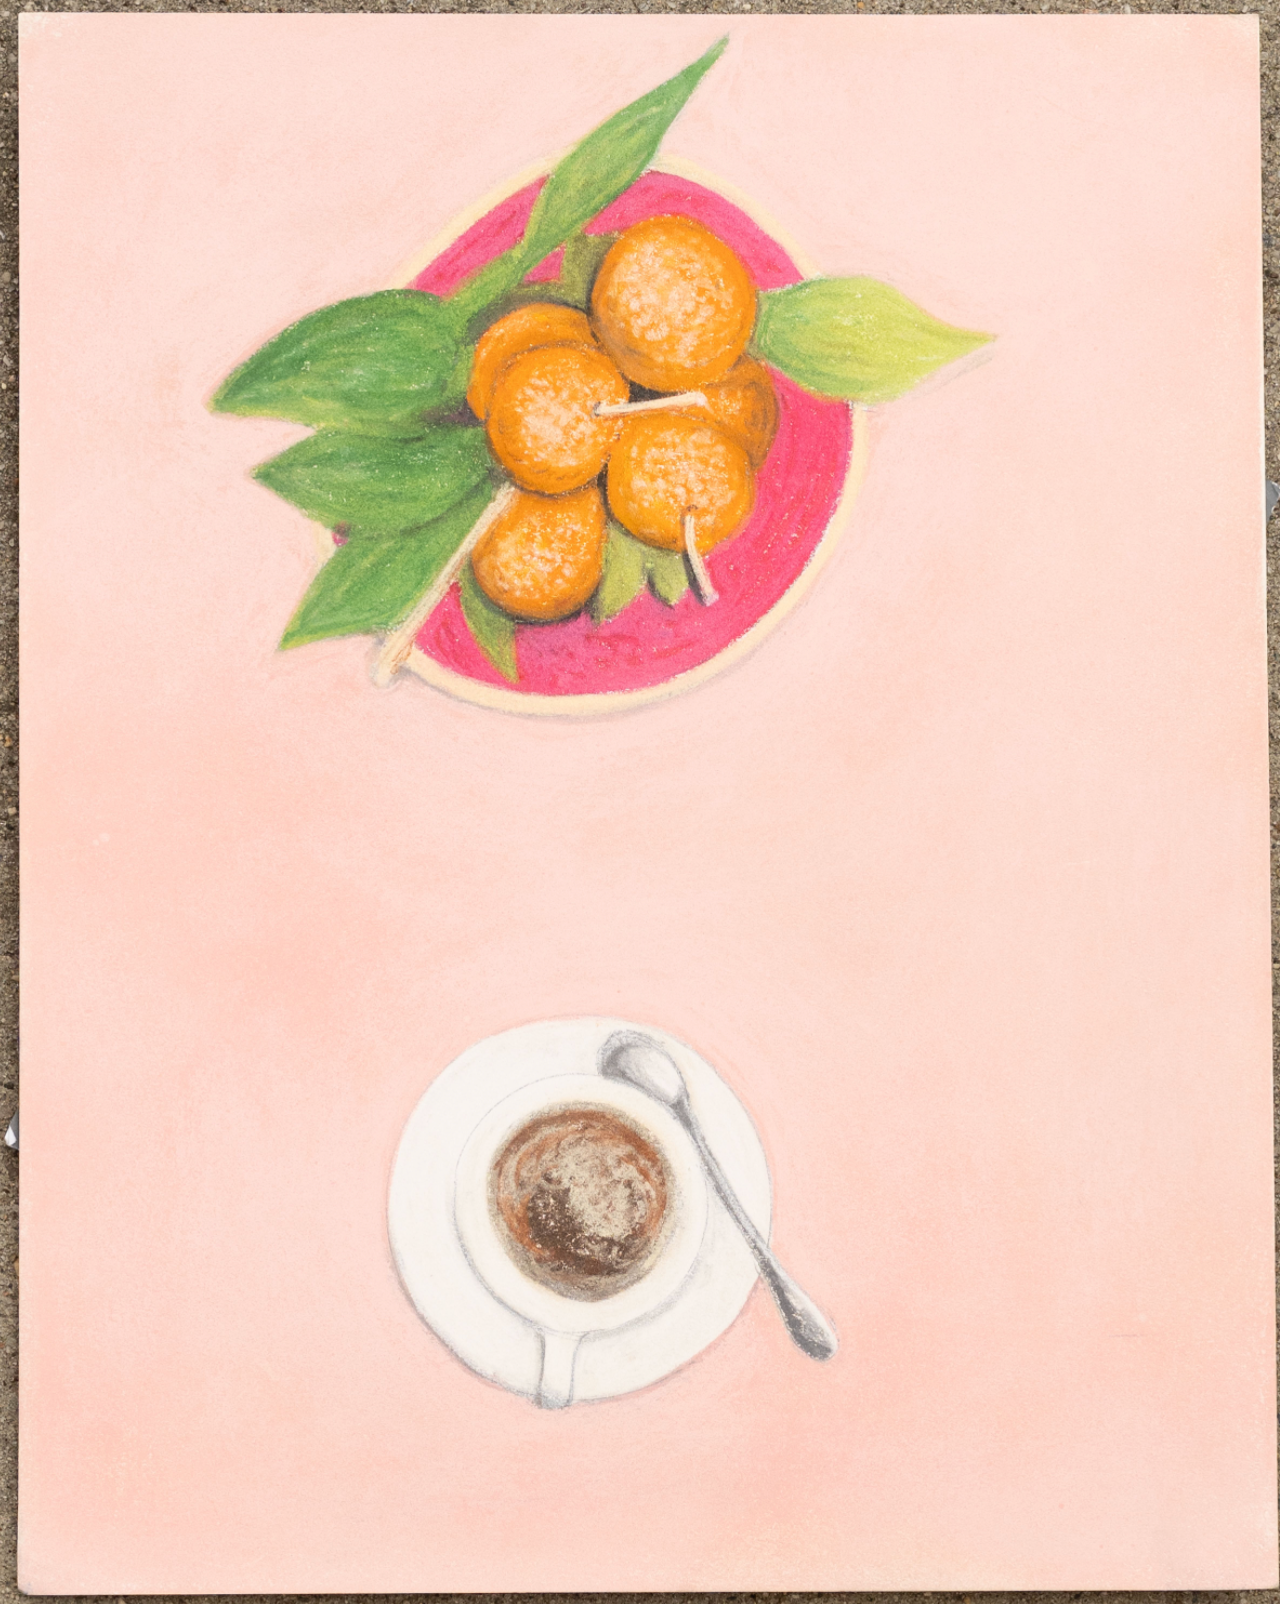 Lee Smith, "Coffee & Clementines" SOLD